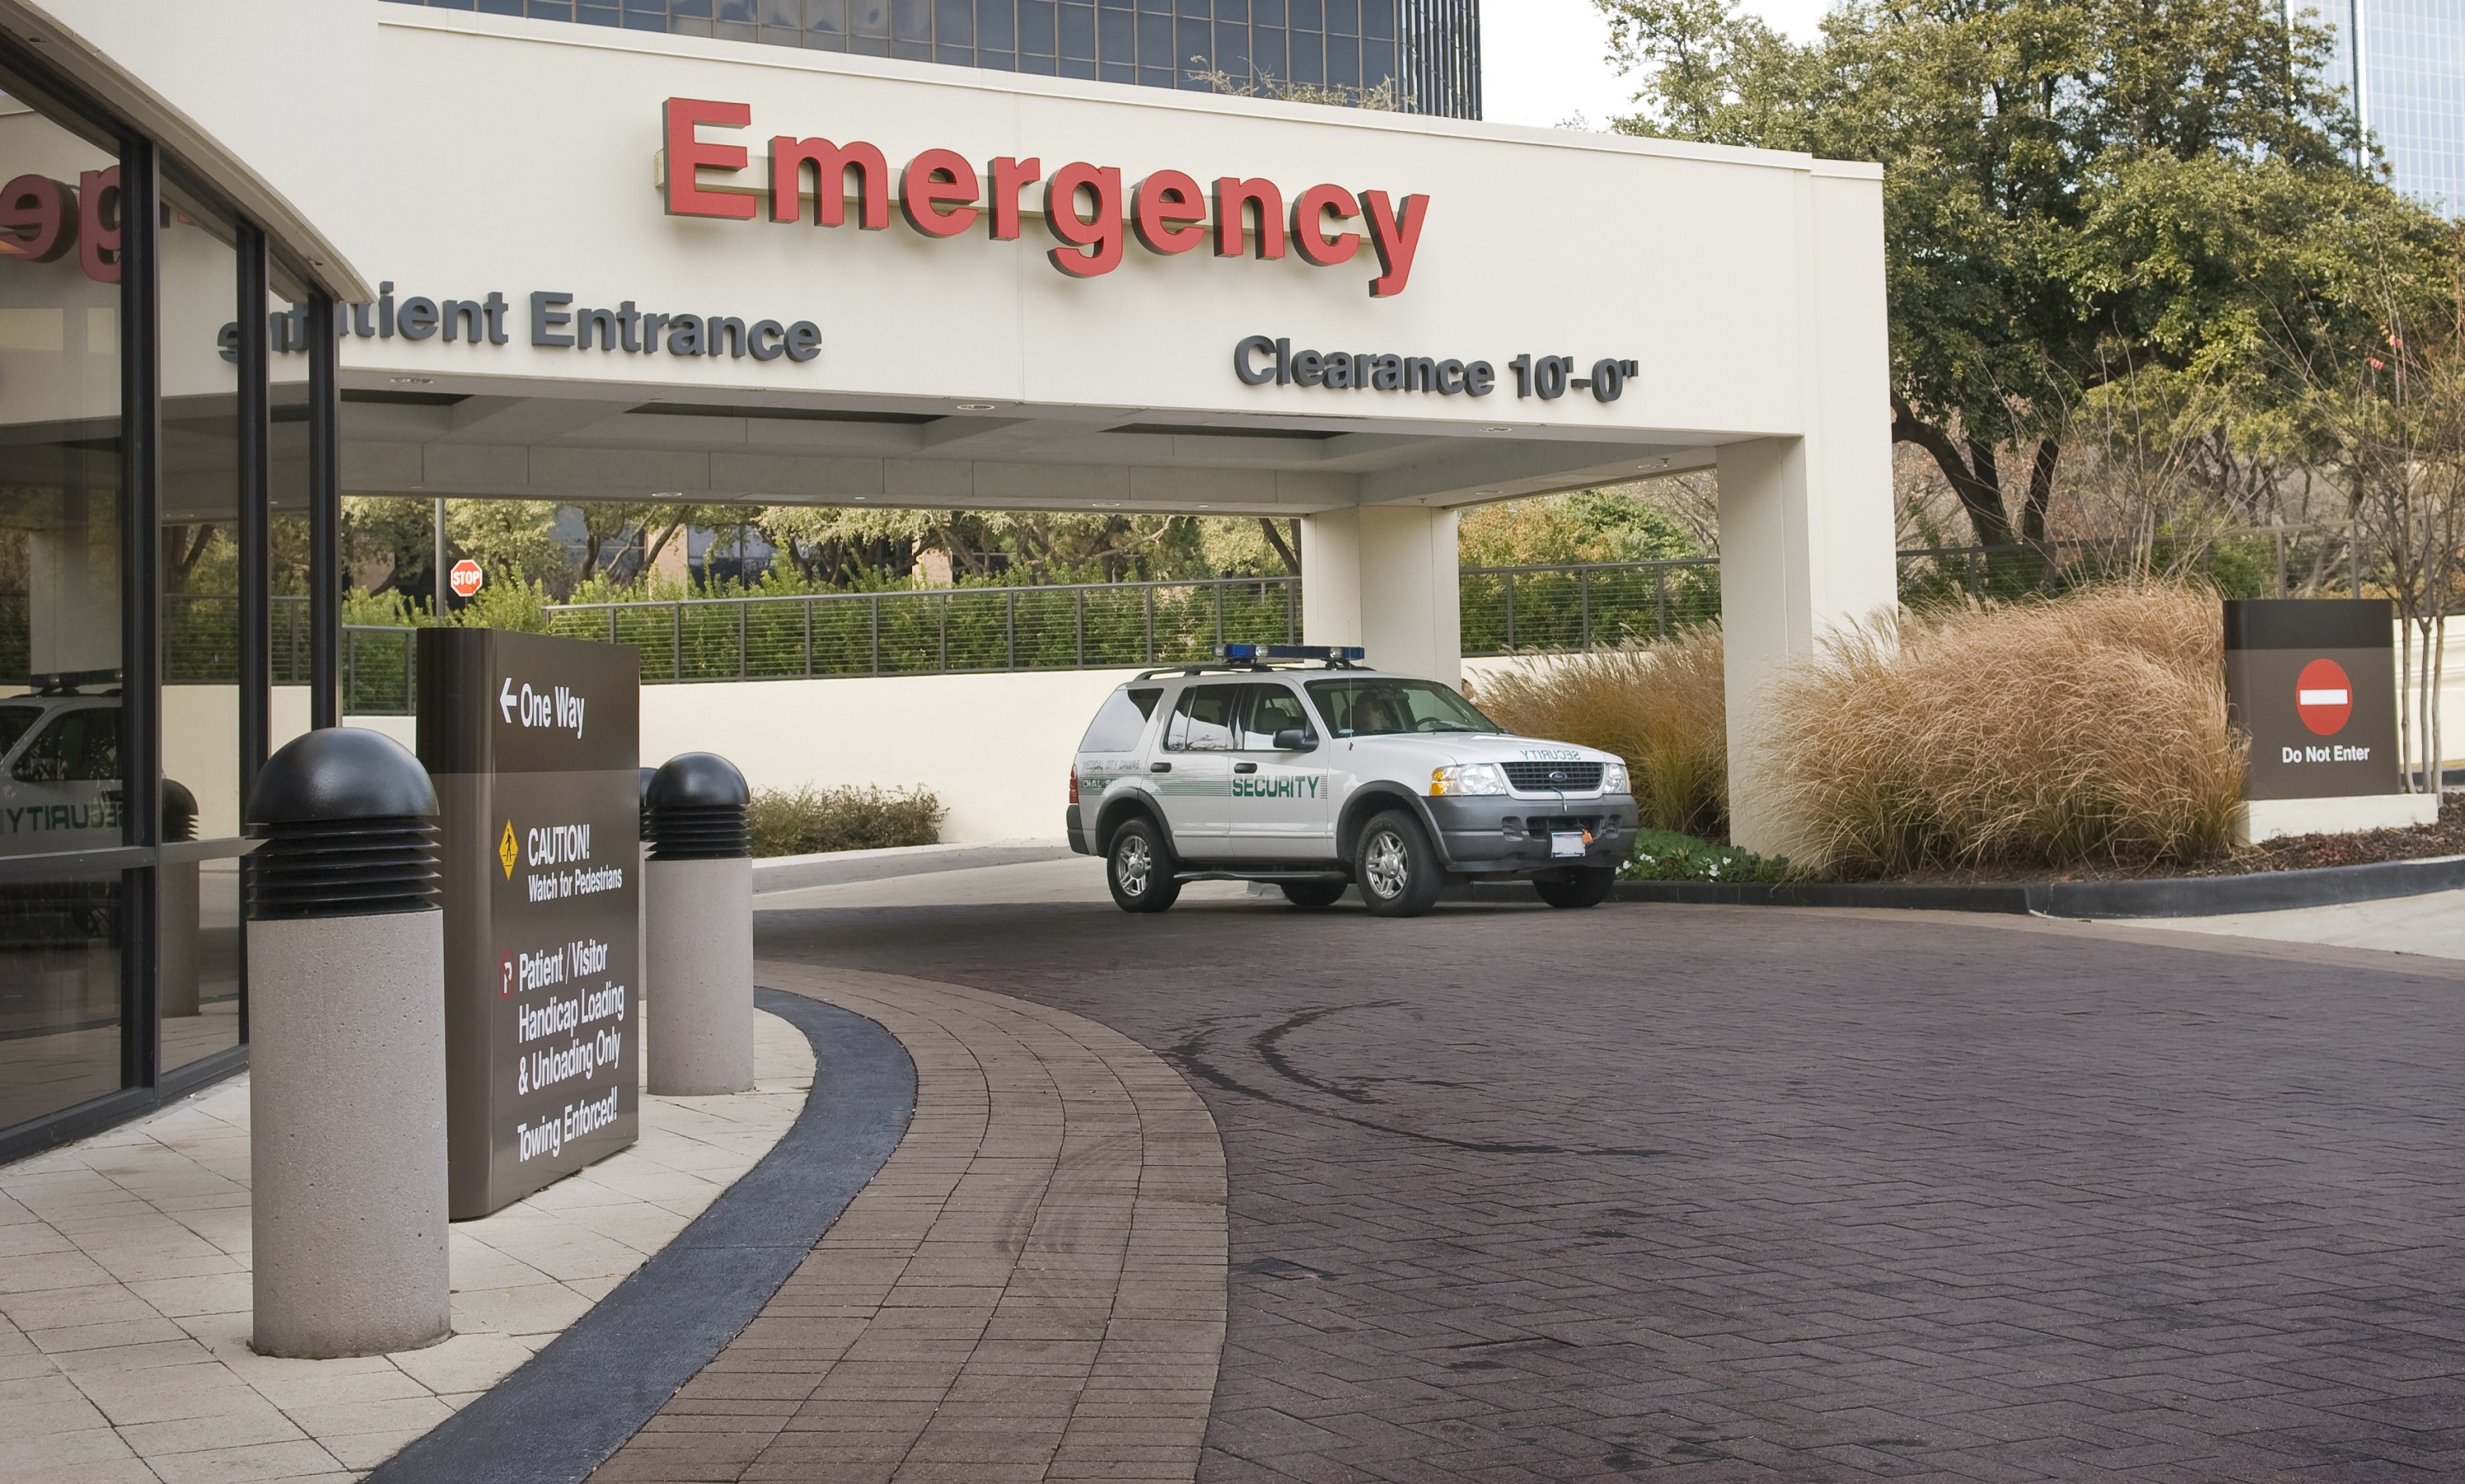 Emergency Room Entrance With Security